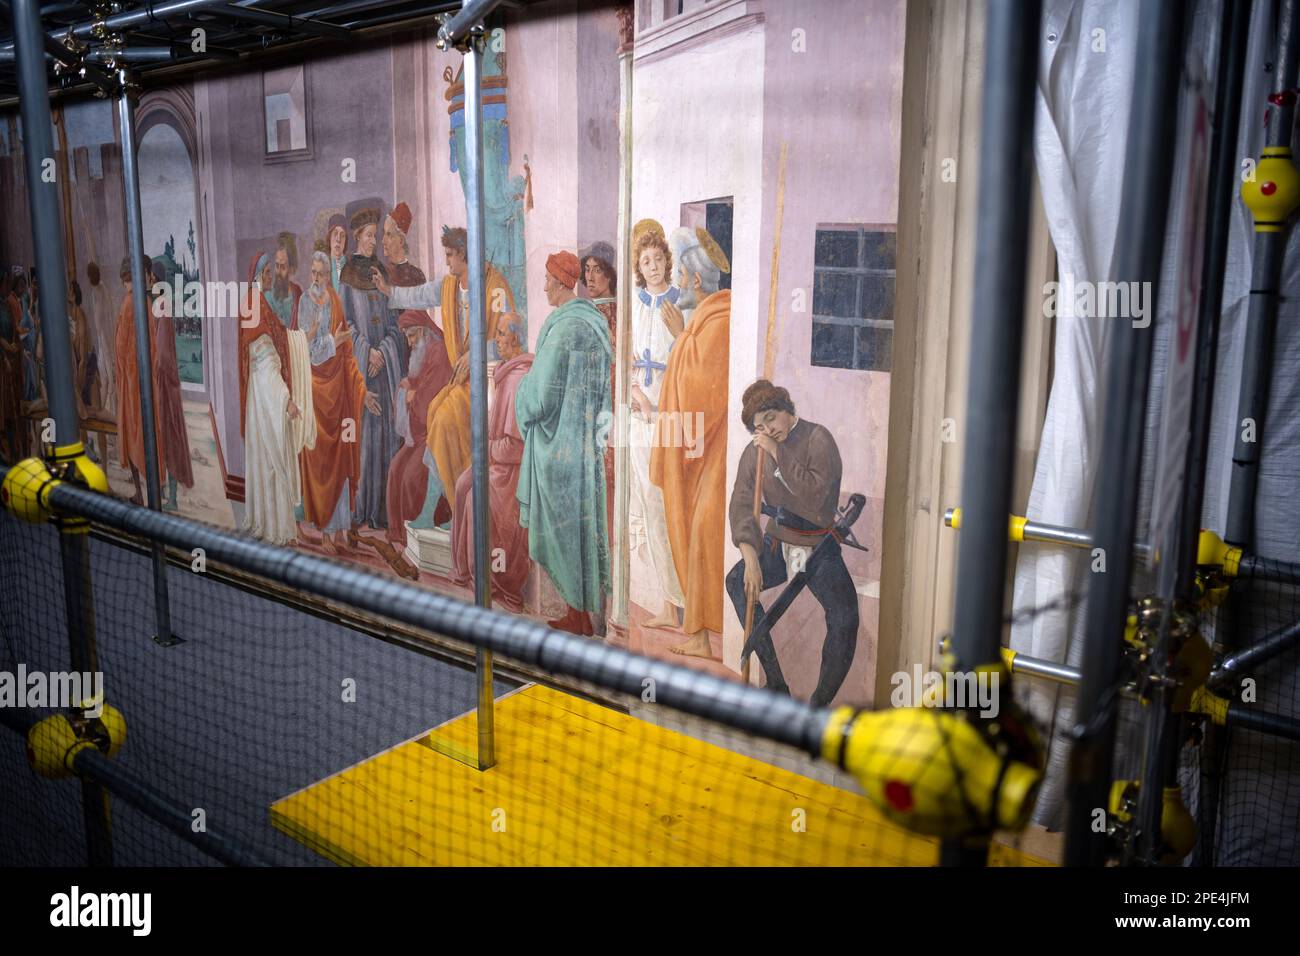 Restoration work in progress on the famous frescoes of the Branacci Chapel in Florence. Small time limited tours allowed amidst the scaffolding Stock Photo